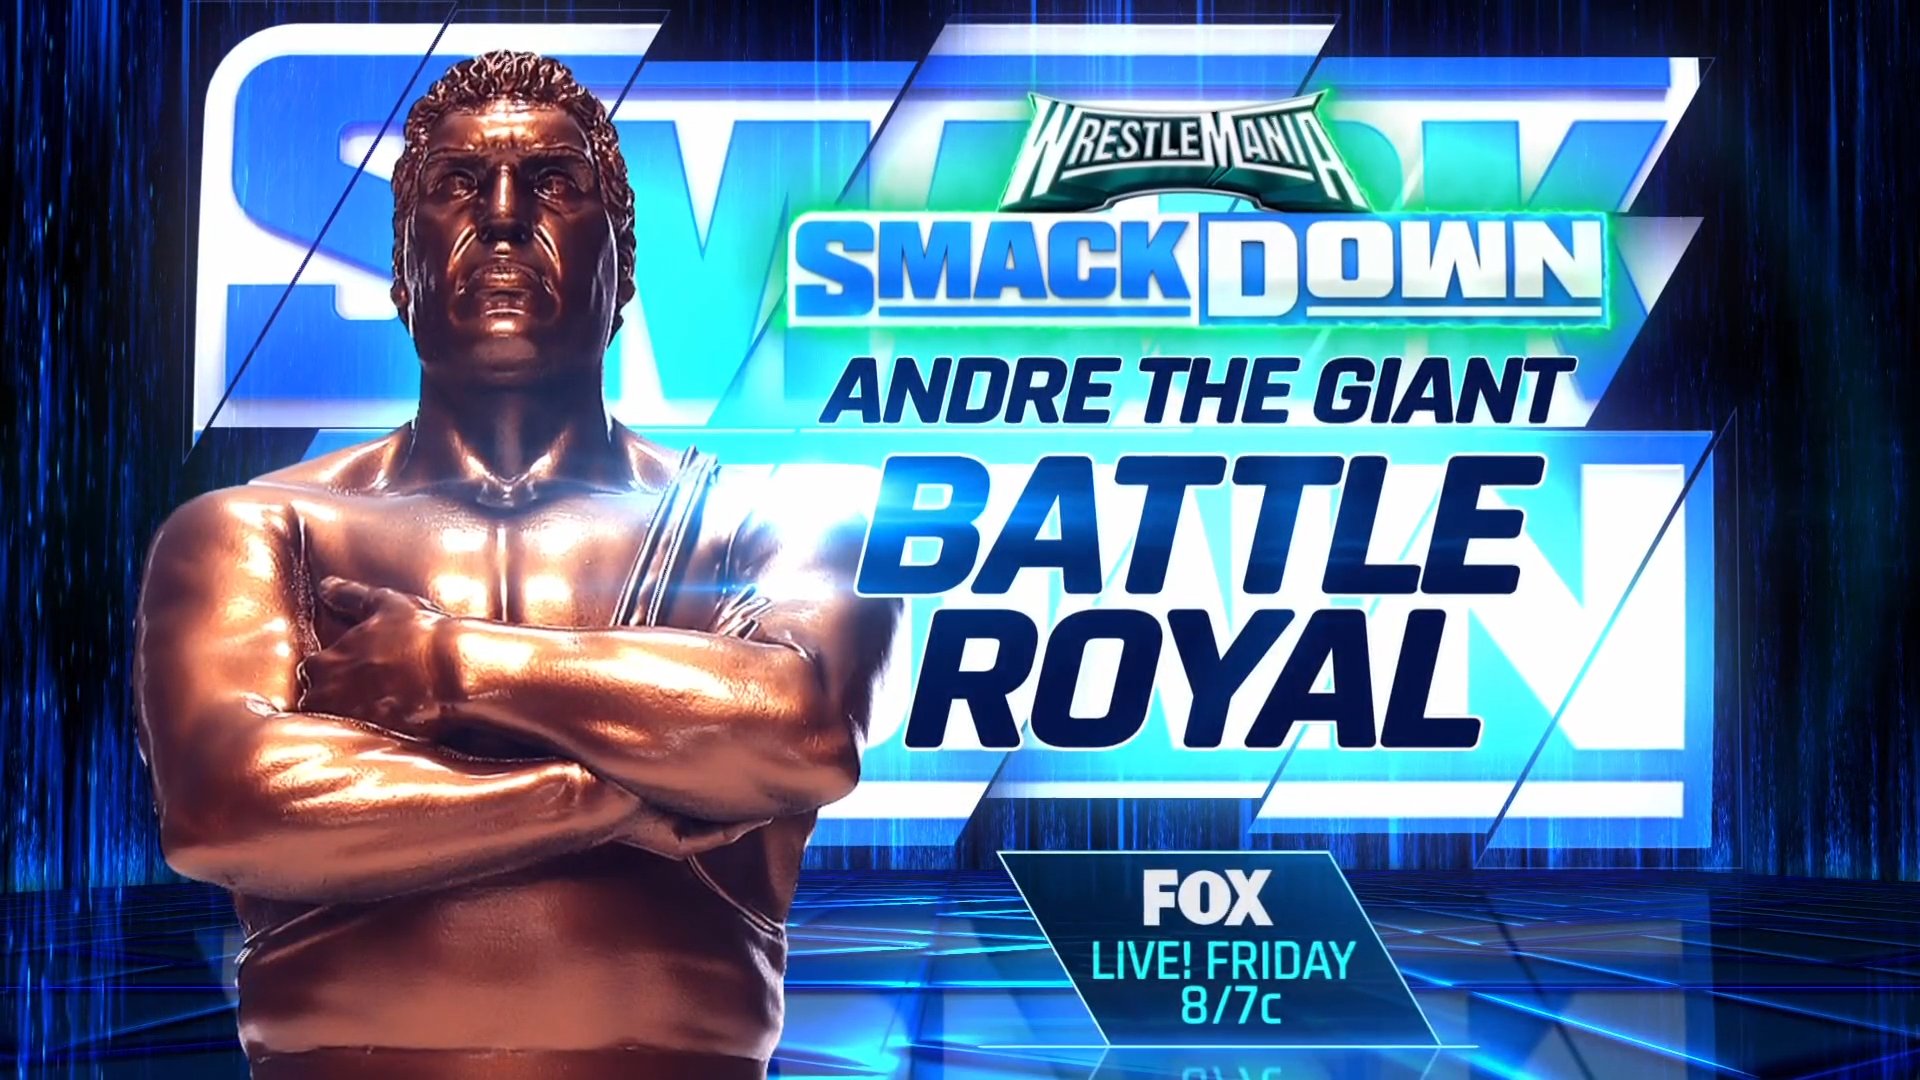 A match graphic for WWE WrestleMania SmackDown.